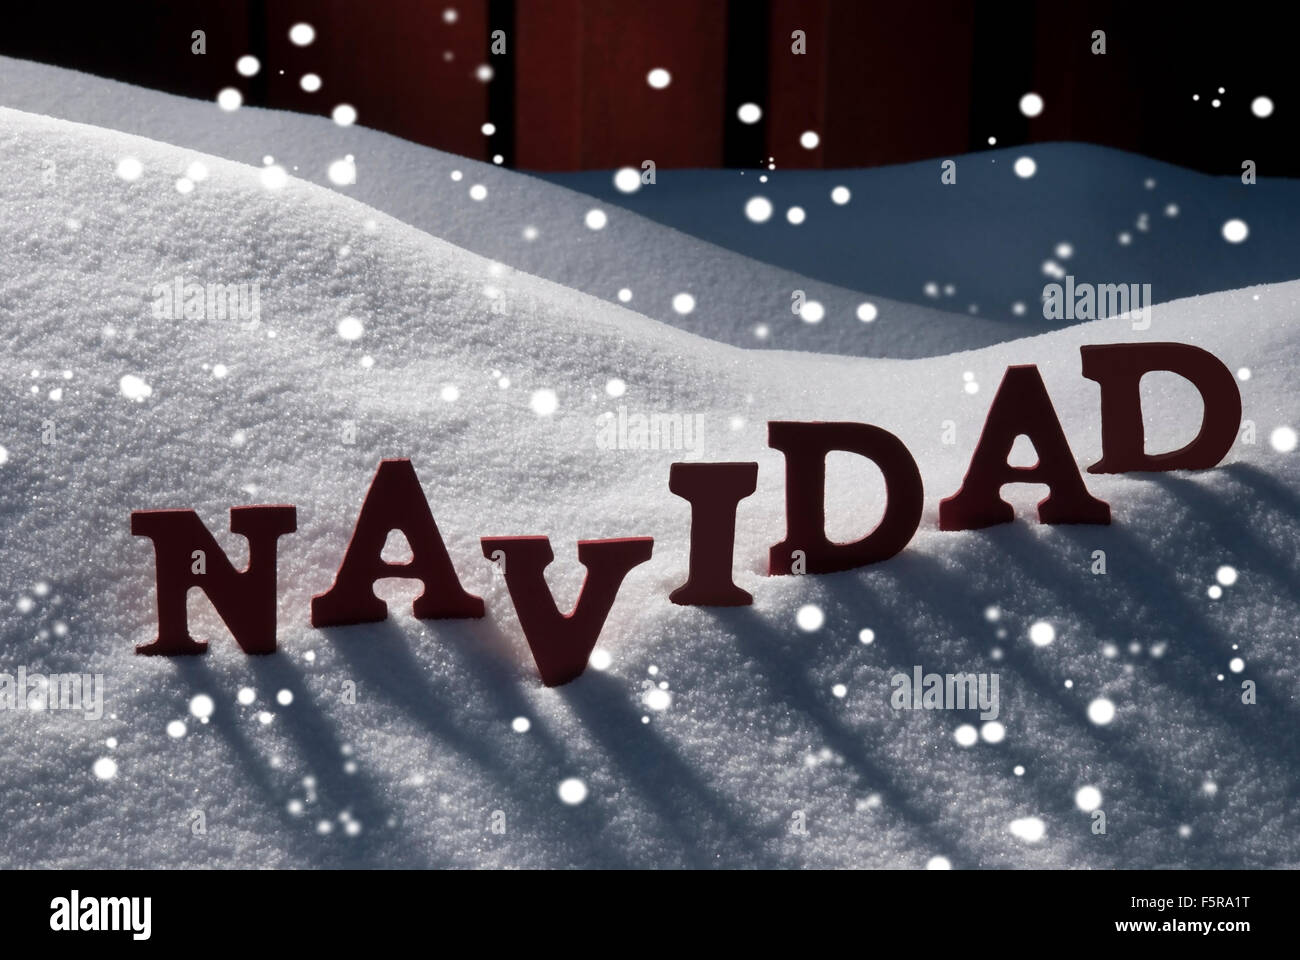 Card With Snow And Word Navidad Mean Christmas, Snowflakes Stock Photo